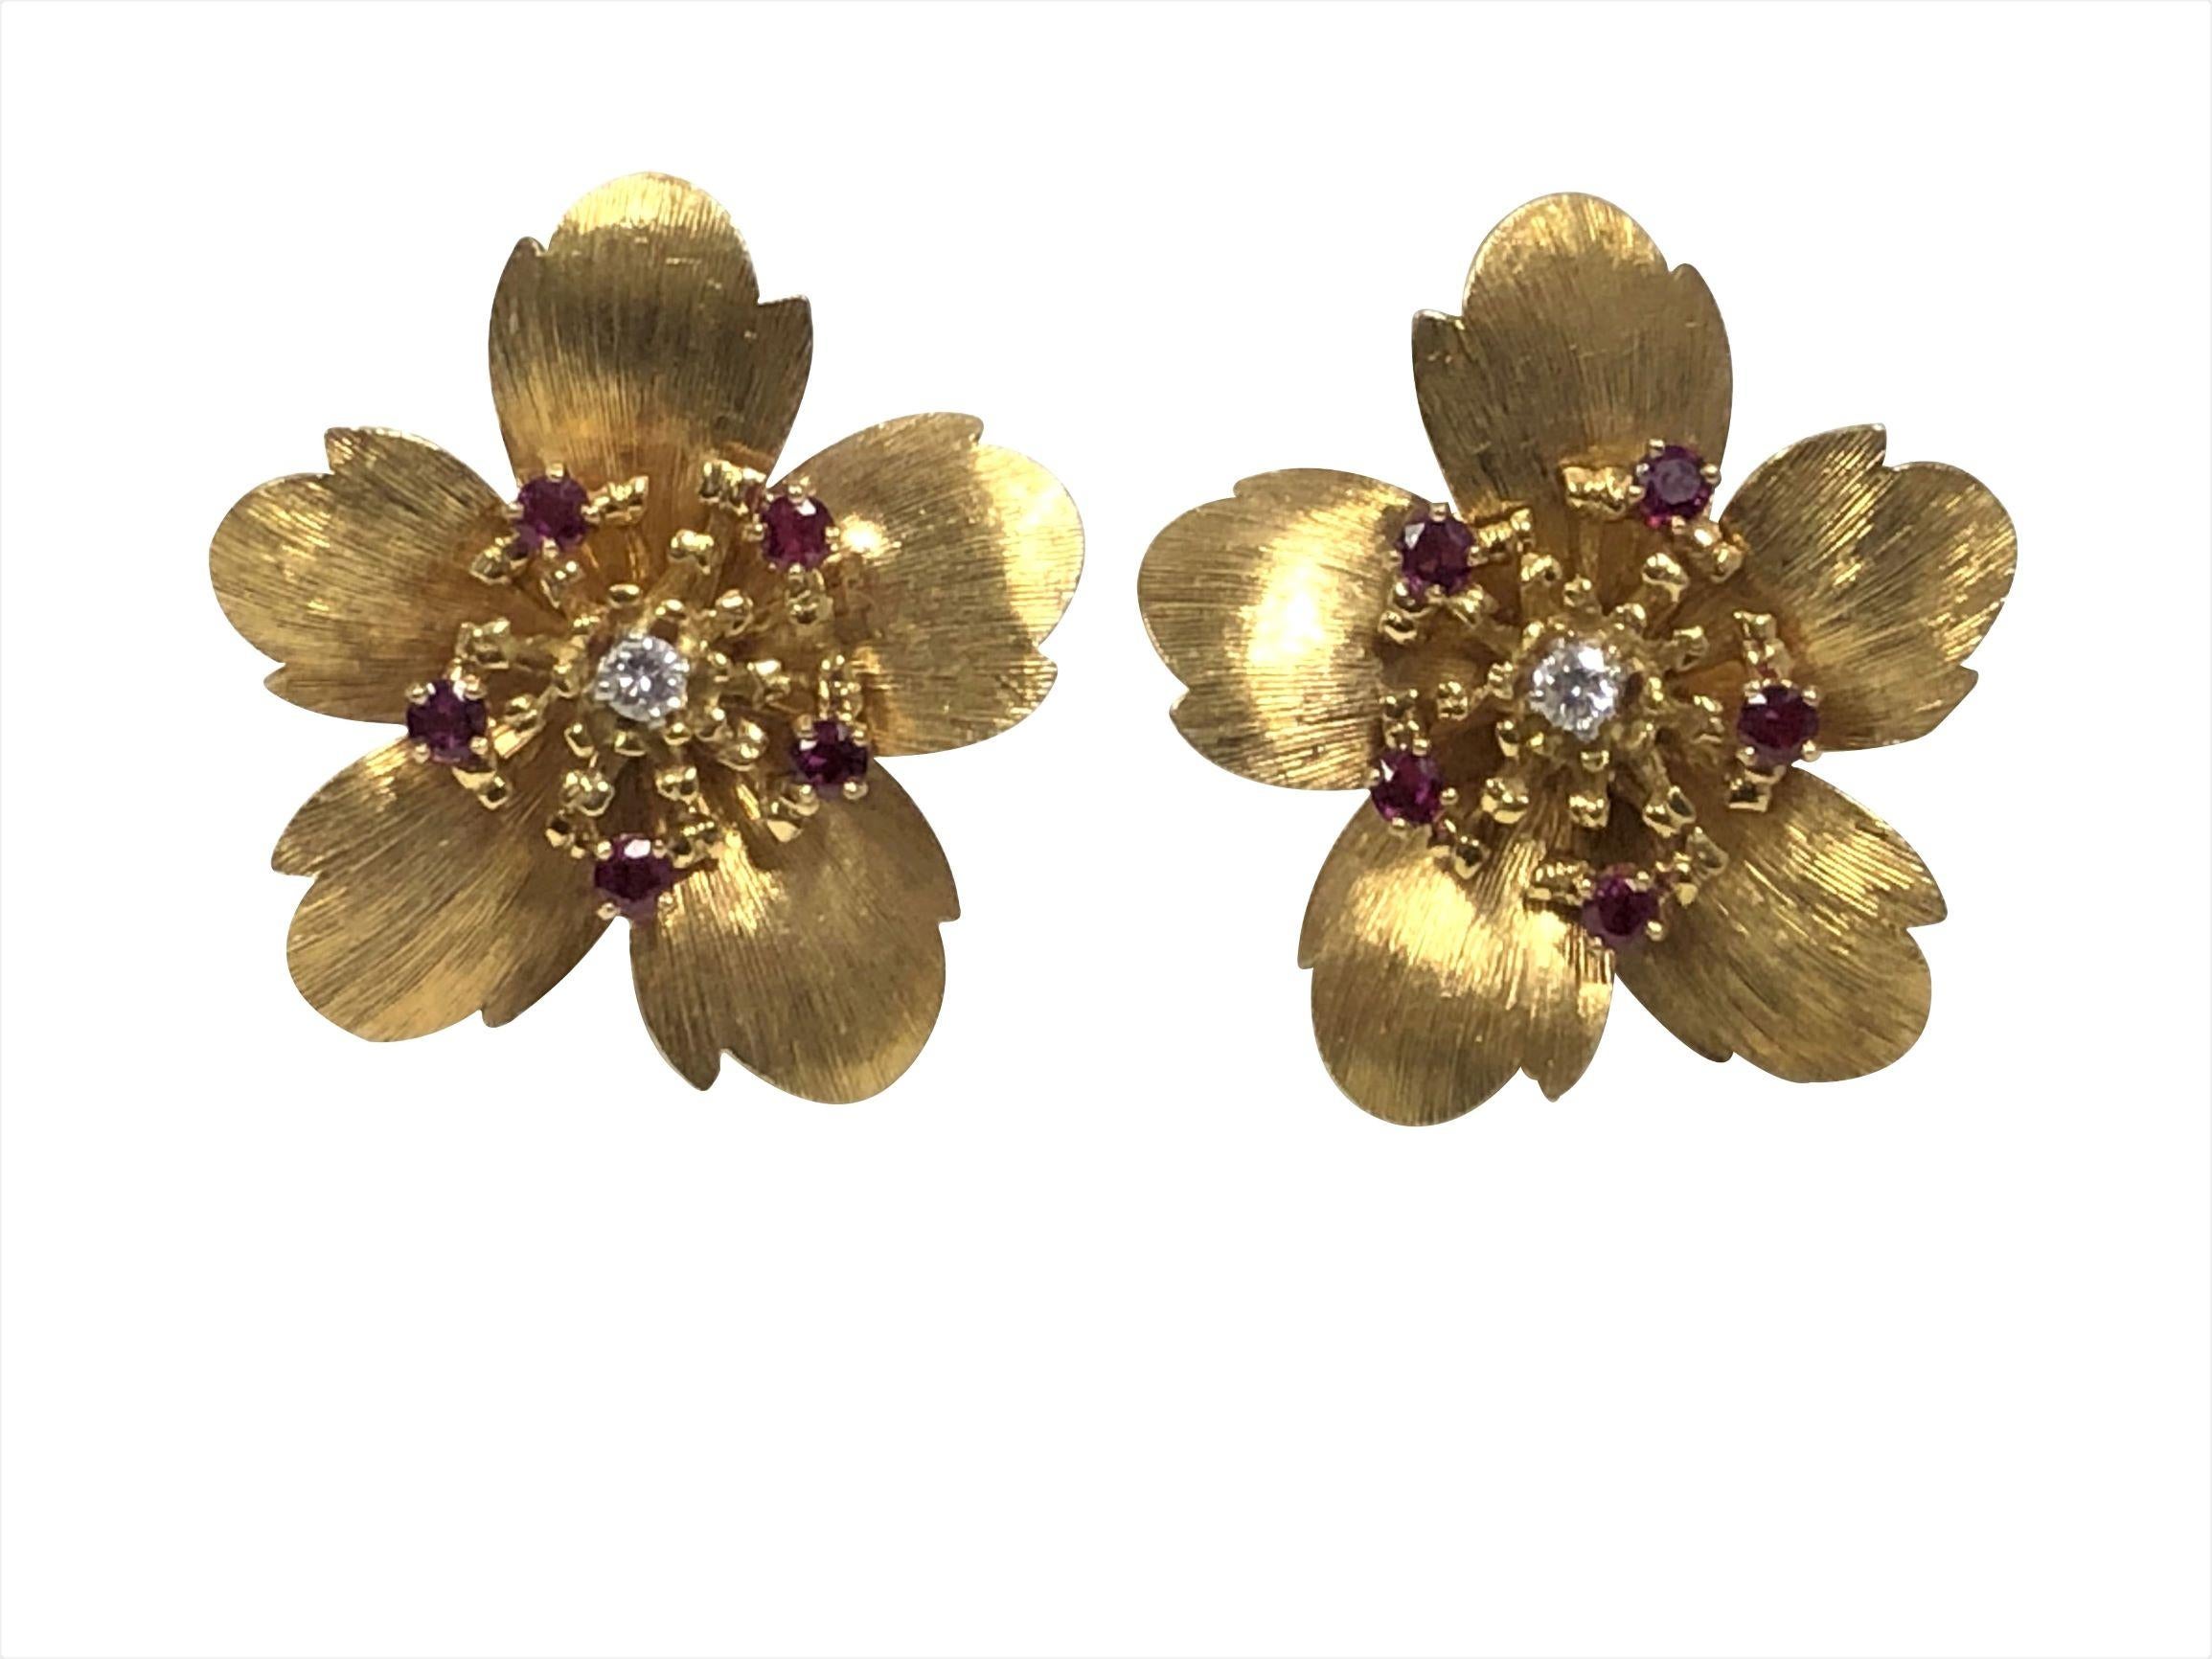 Circa 1980 Tiffany & Company Flower Earrings, measuring 1 1/4 inch in diameter, having textured Pedals and set with a Round Brilliant cut Diamond in the center and surrounded by Rubies. Clip Backs, weighing 21.5 Grams and come in the original